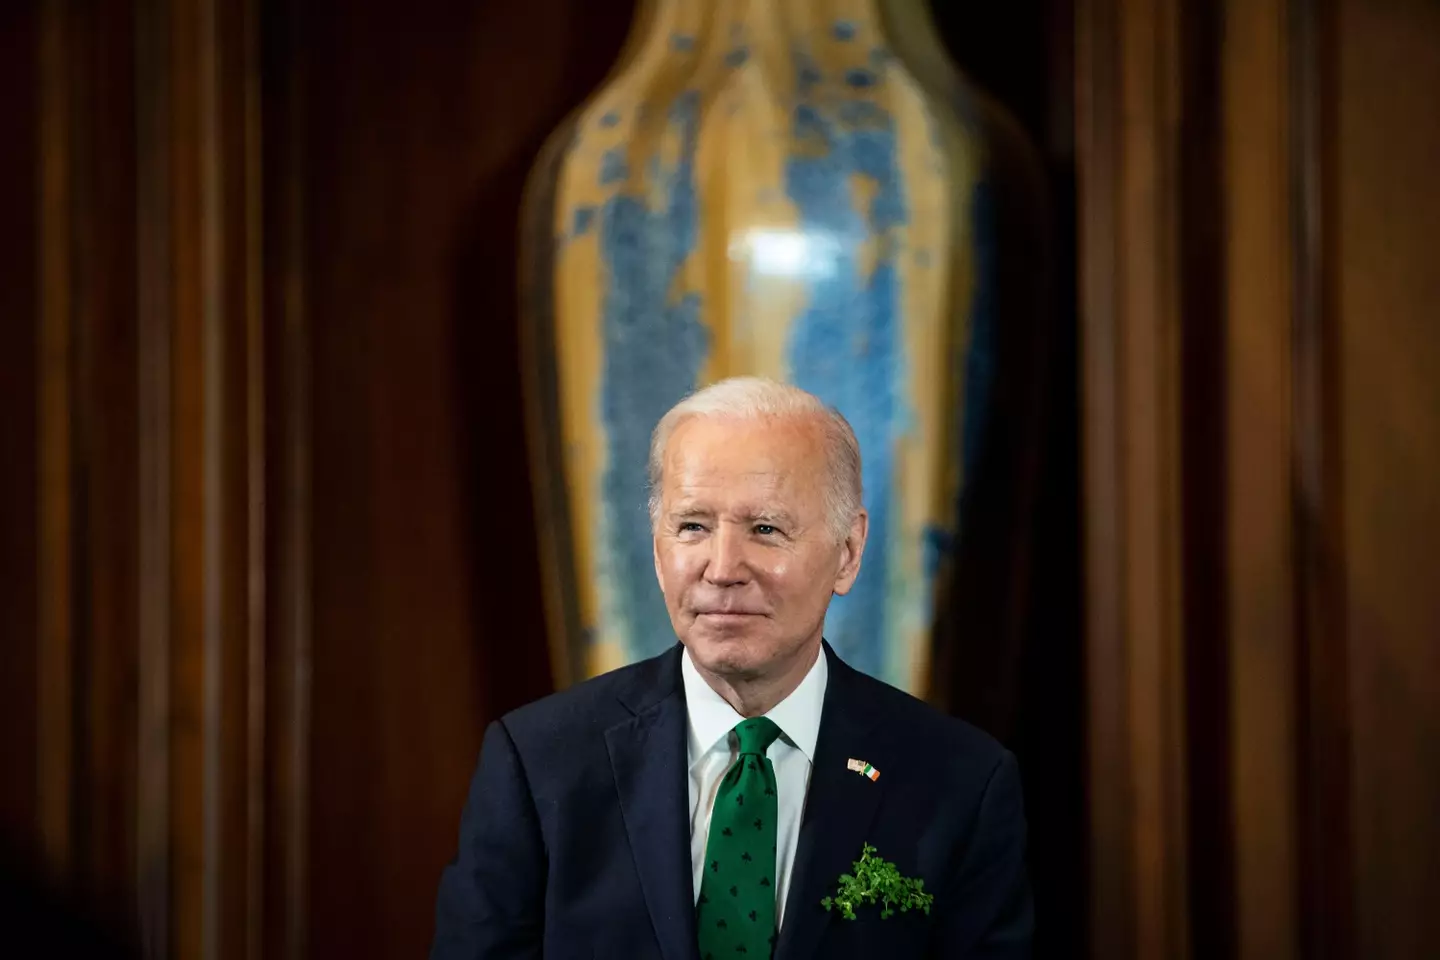 Biden later said Ireland and the USA share a 'common goal'.